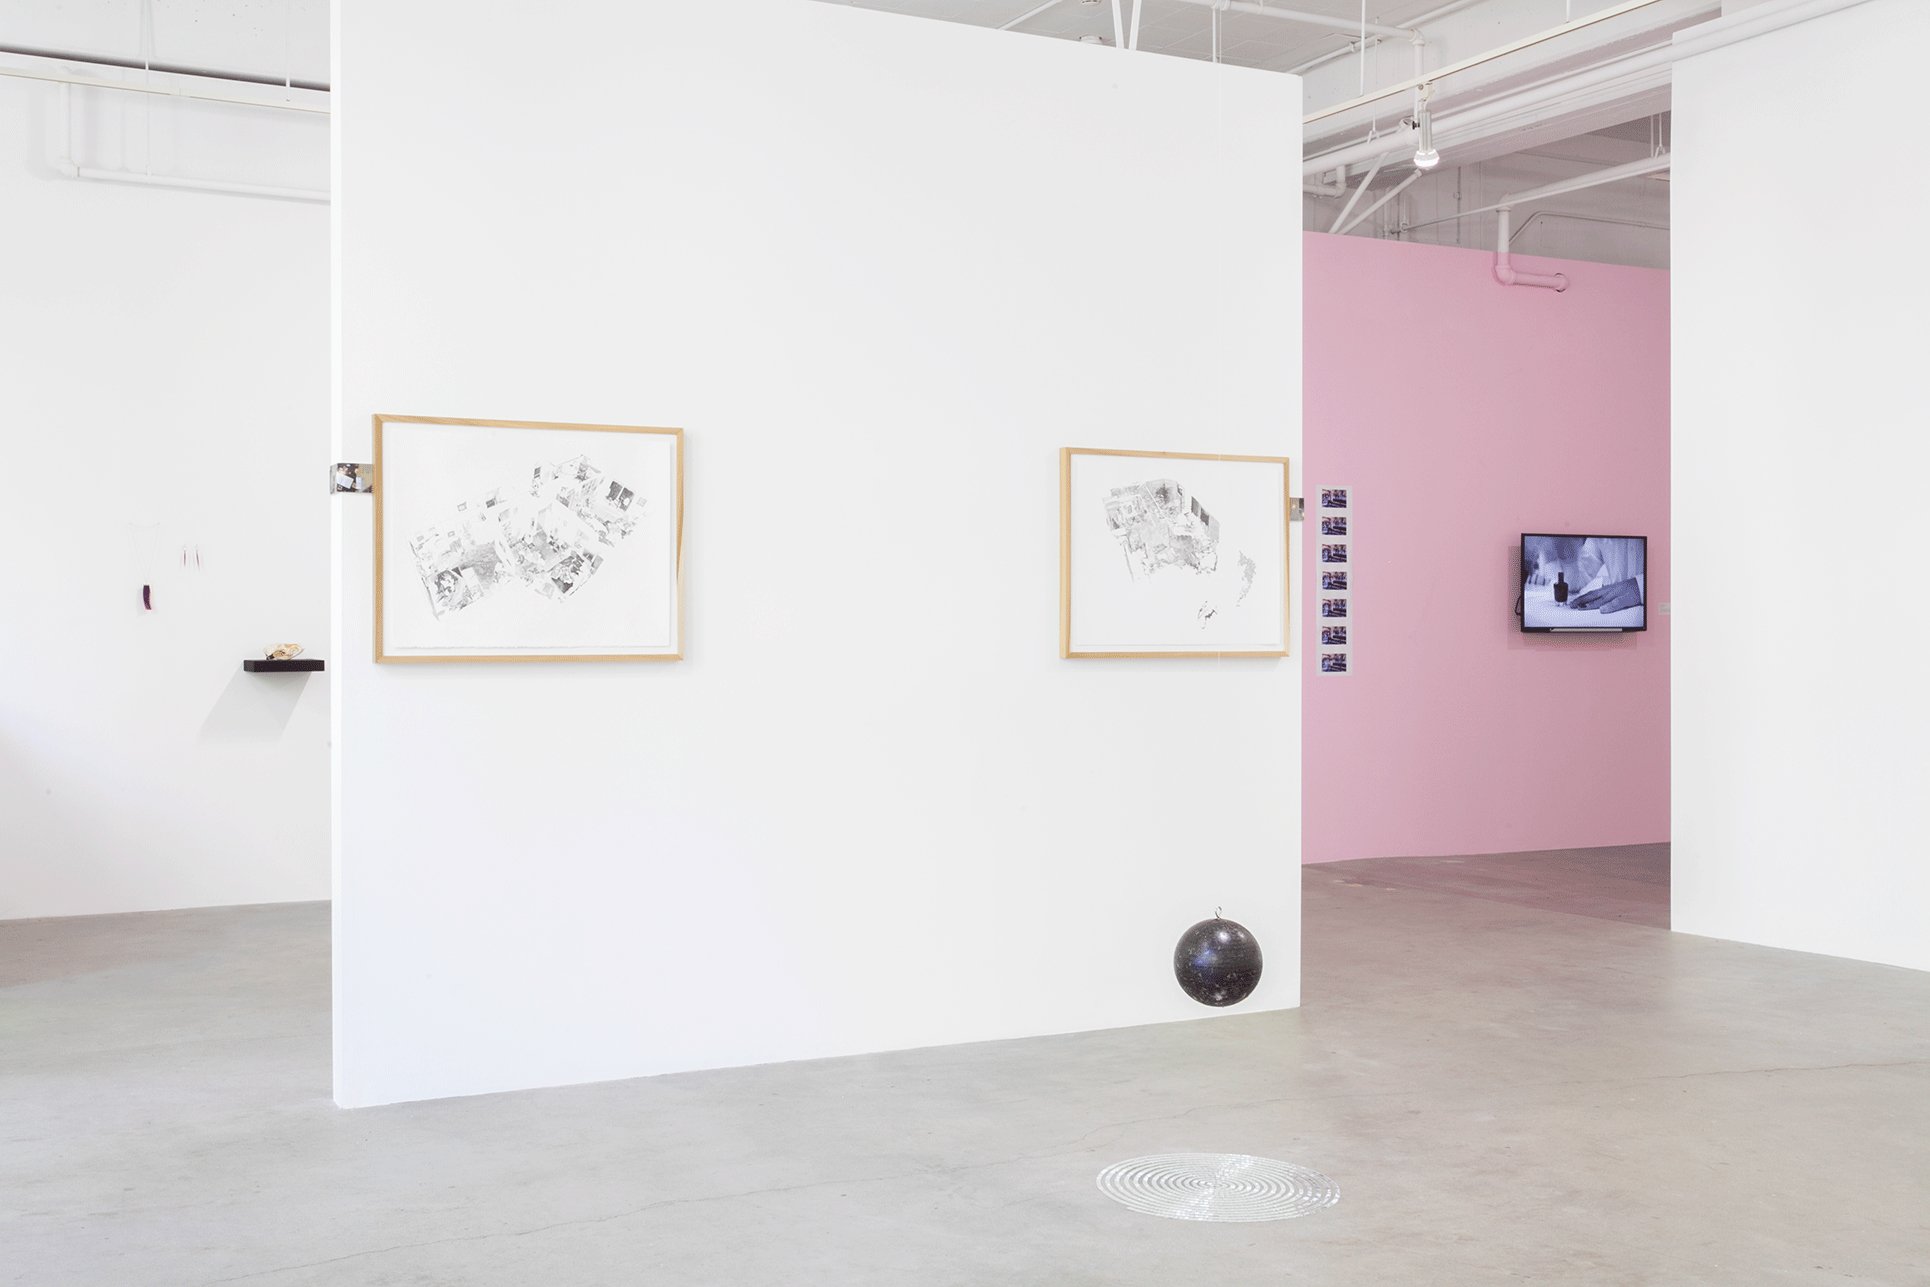 Installation View of Survey, Jacob Lawrence Gallery, WA, 2015